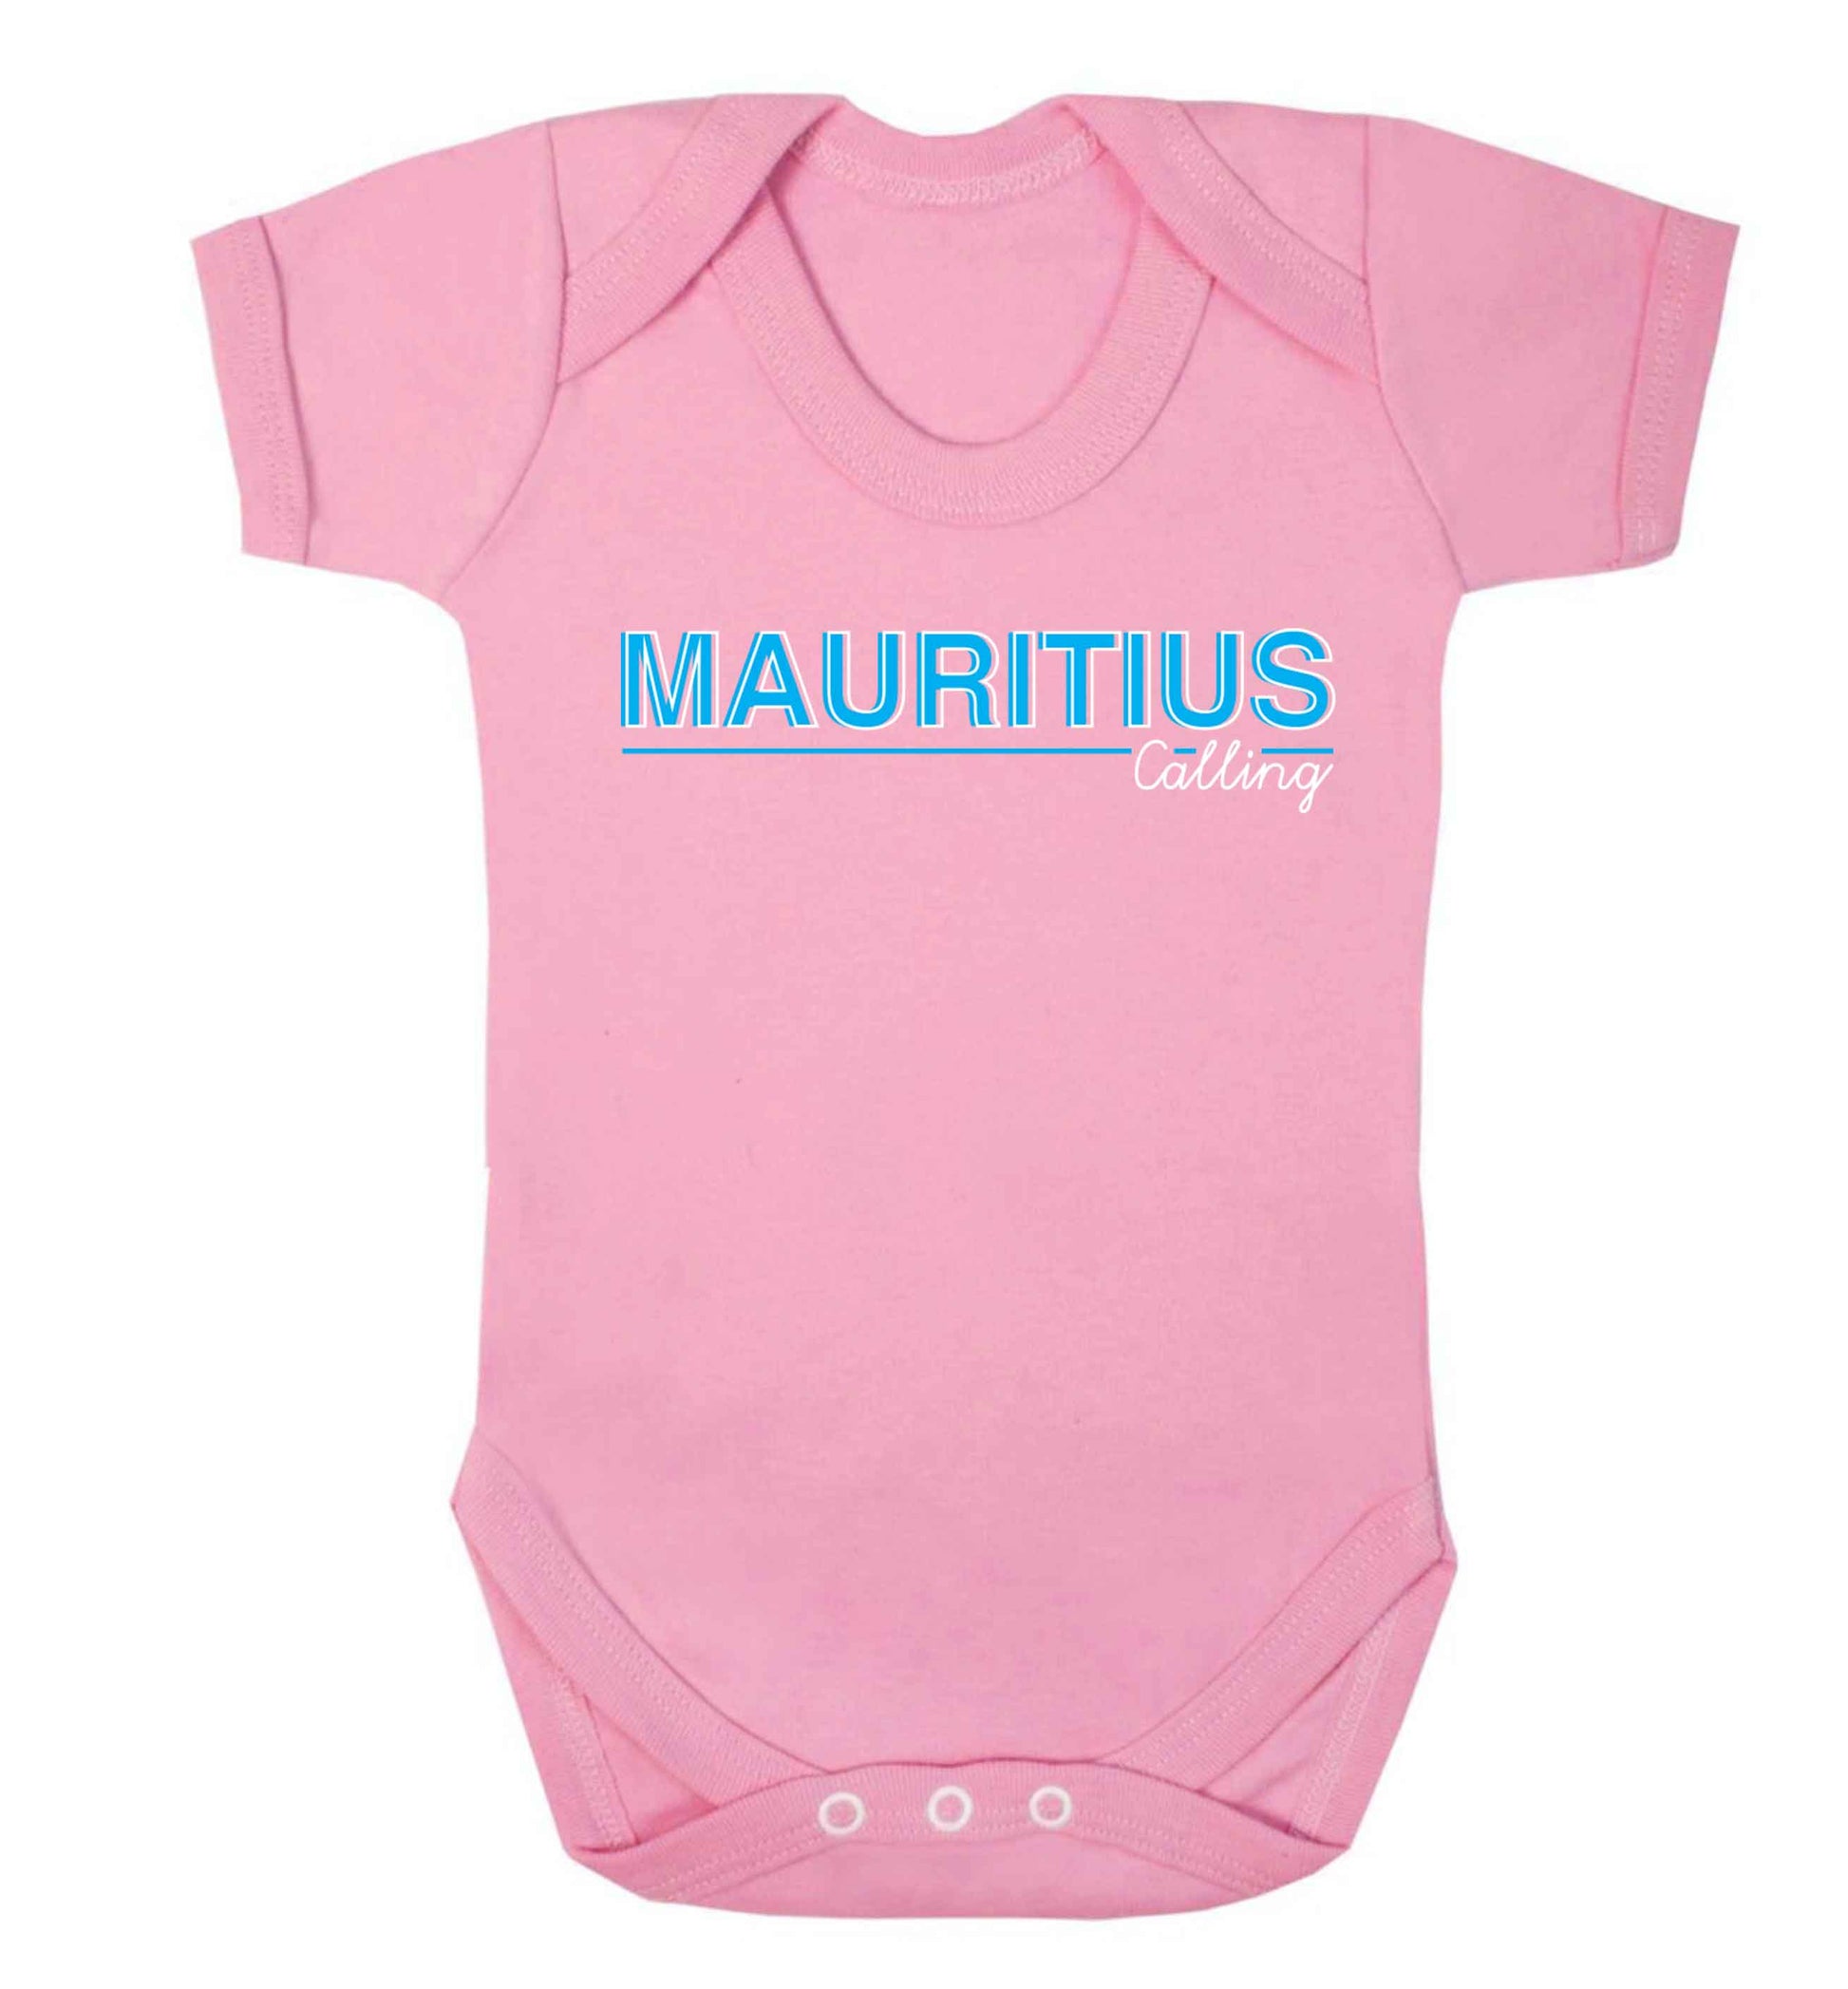 Mauritius calling Baby Vest pale pink 18-24 months